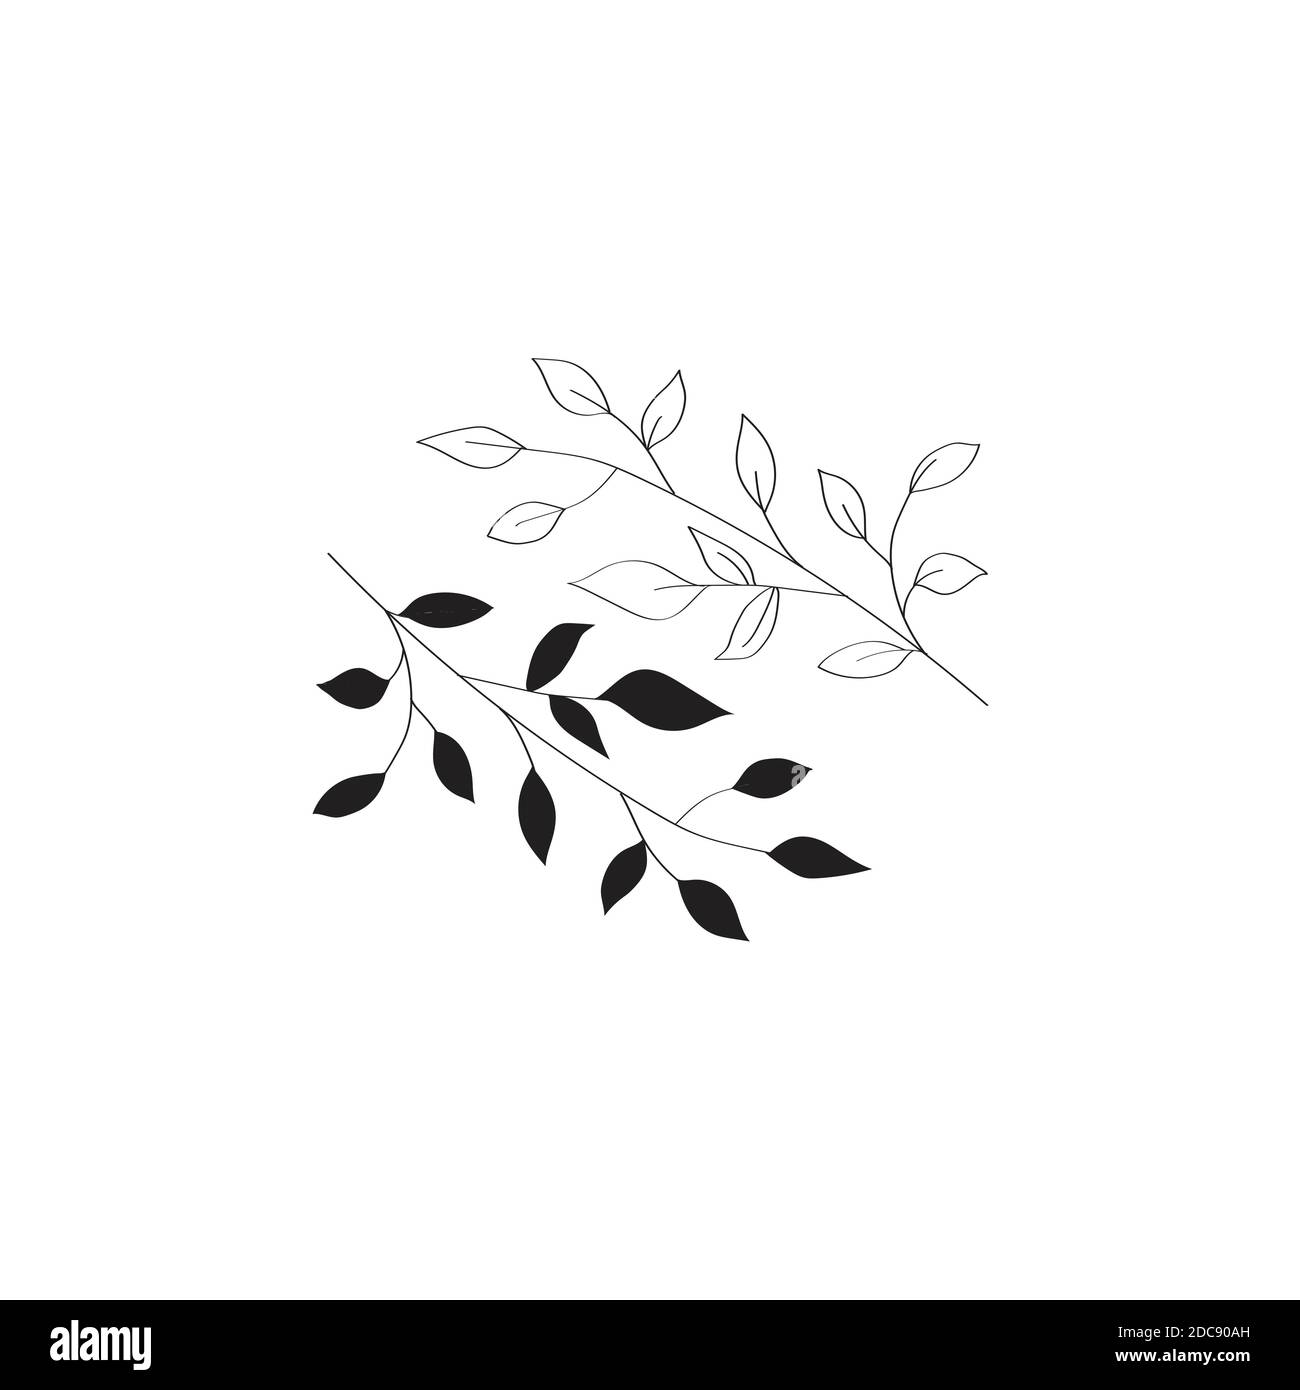 Nature design elements classic flower leaf sketch vectors stock in format  for free download 186MB